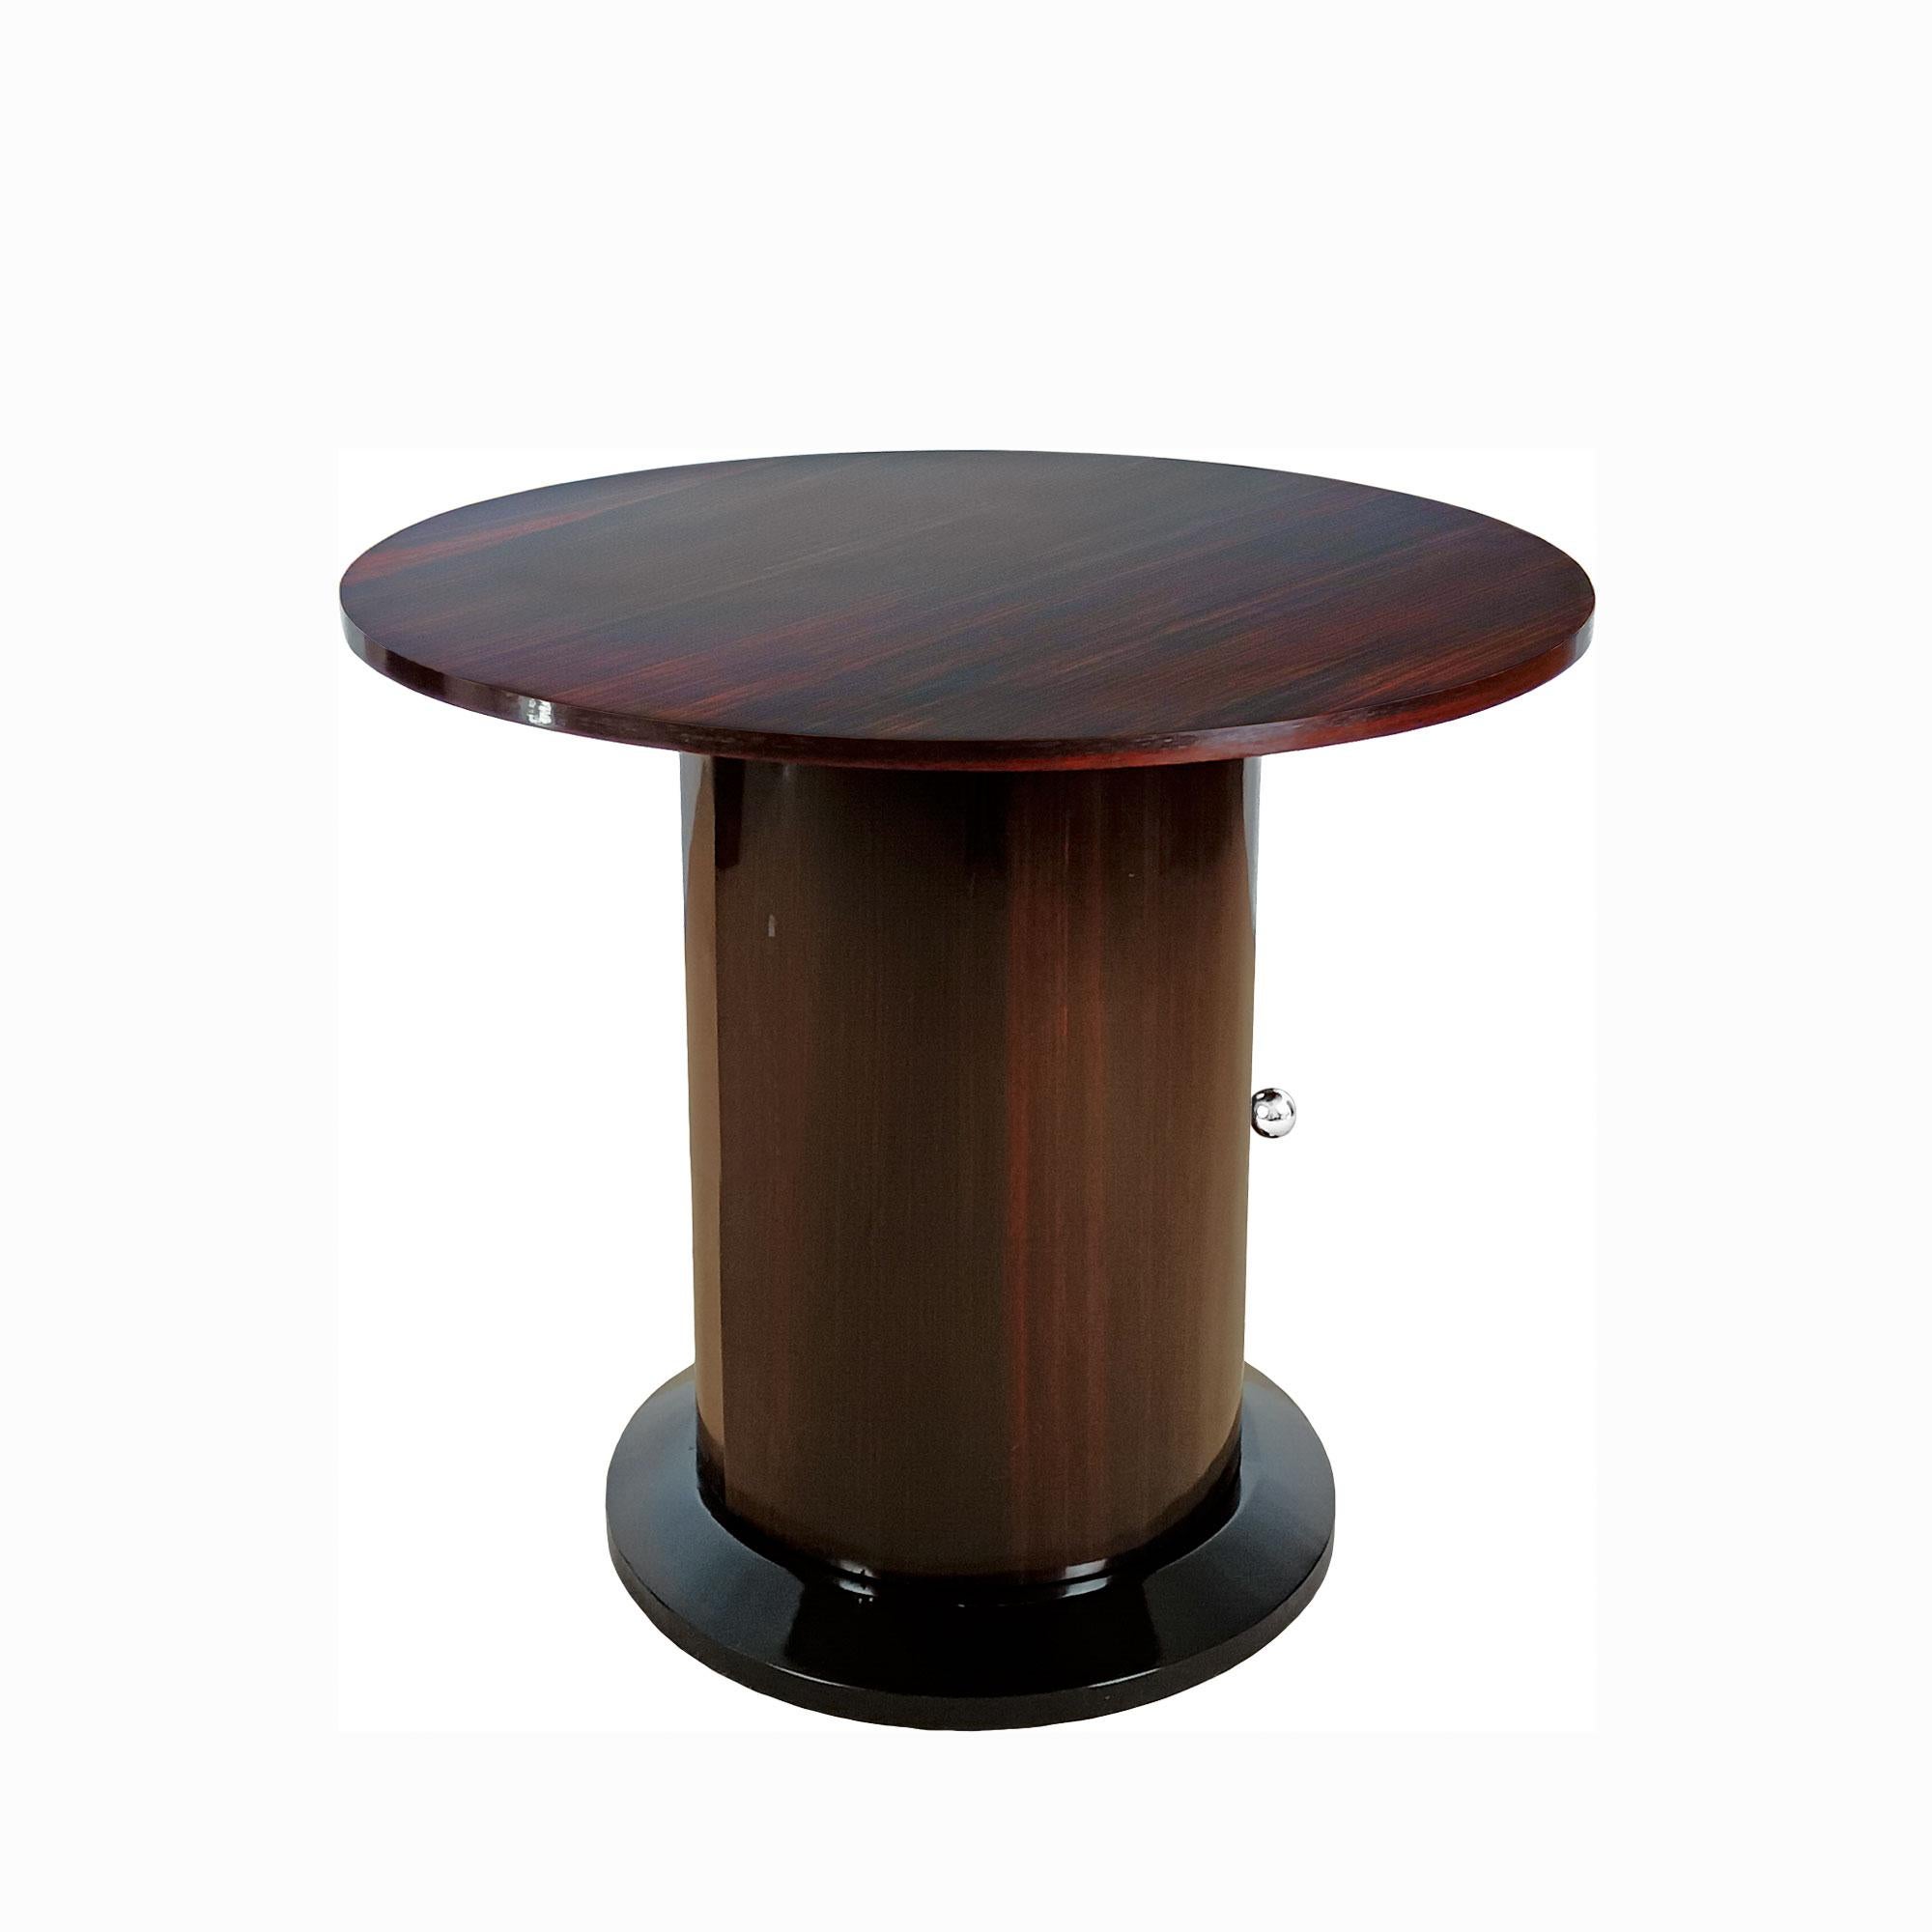 Circular side table – mini bar in wood with rosewood veneer, black lacquered beech base, nickel-plated brass knob. French polish.

France 1940